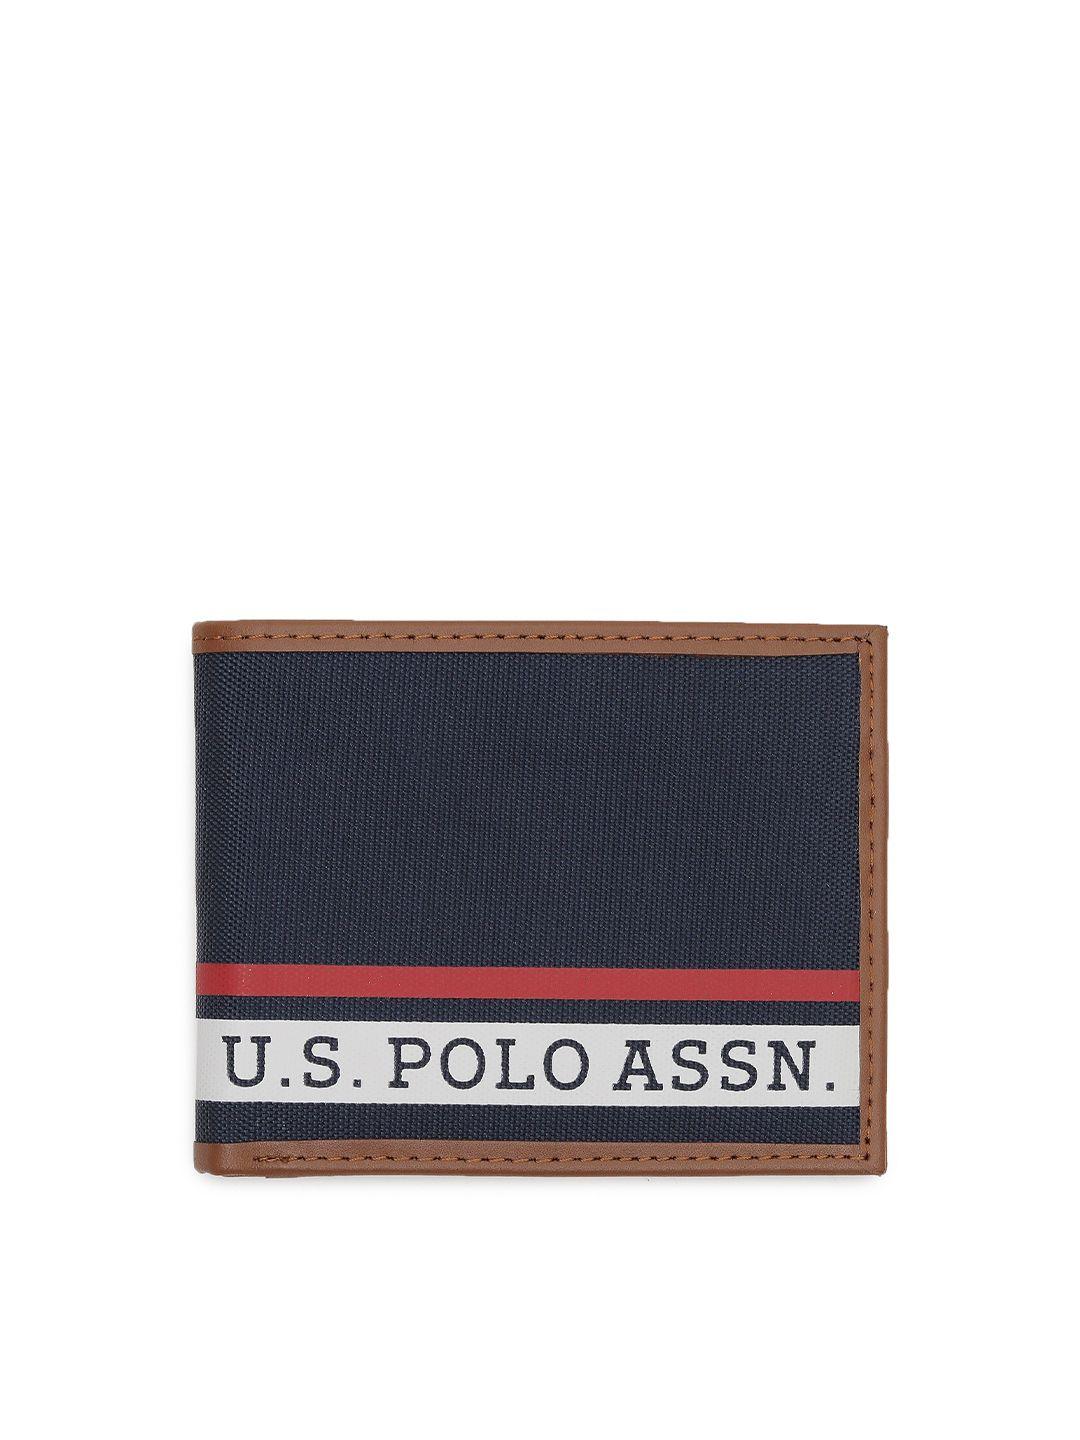 u s polo assn men navy blue & white printed leather two fold wallet